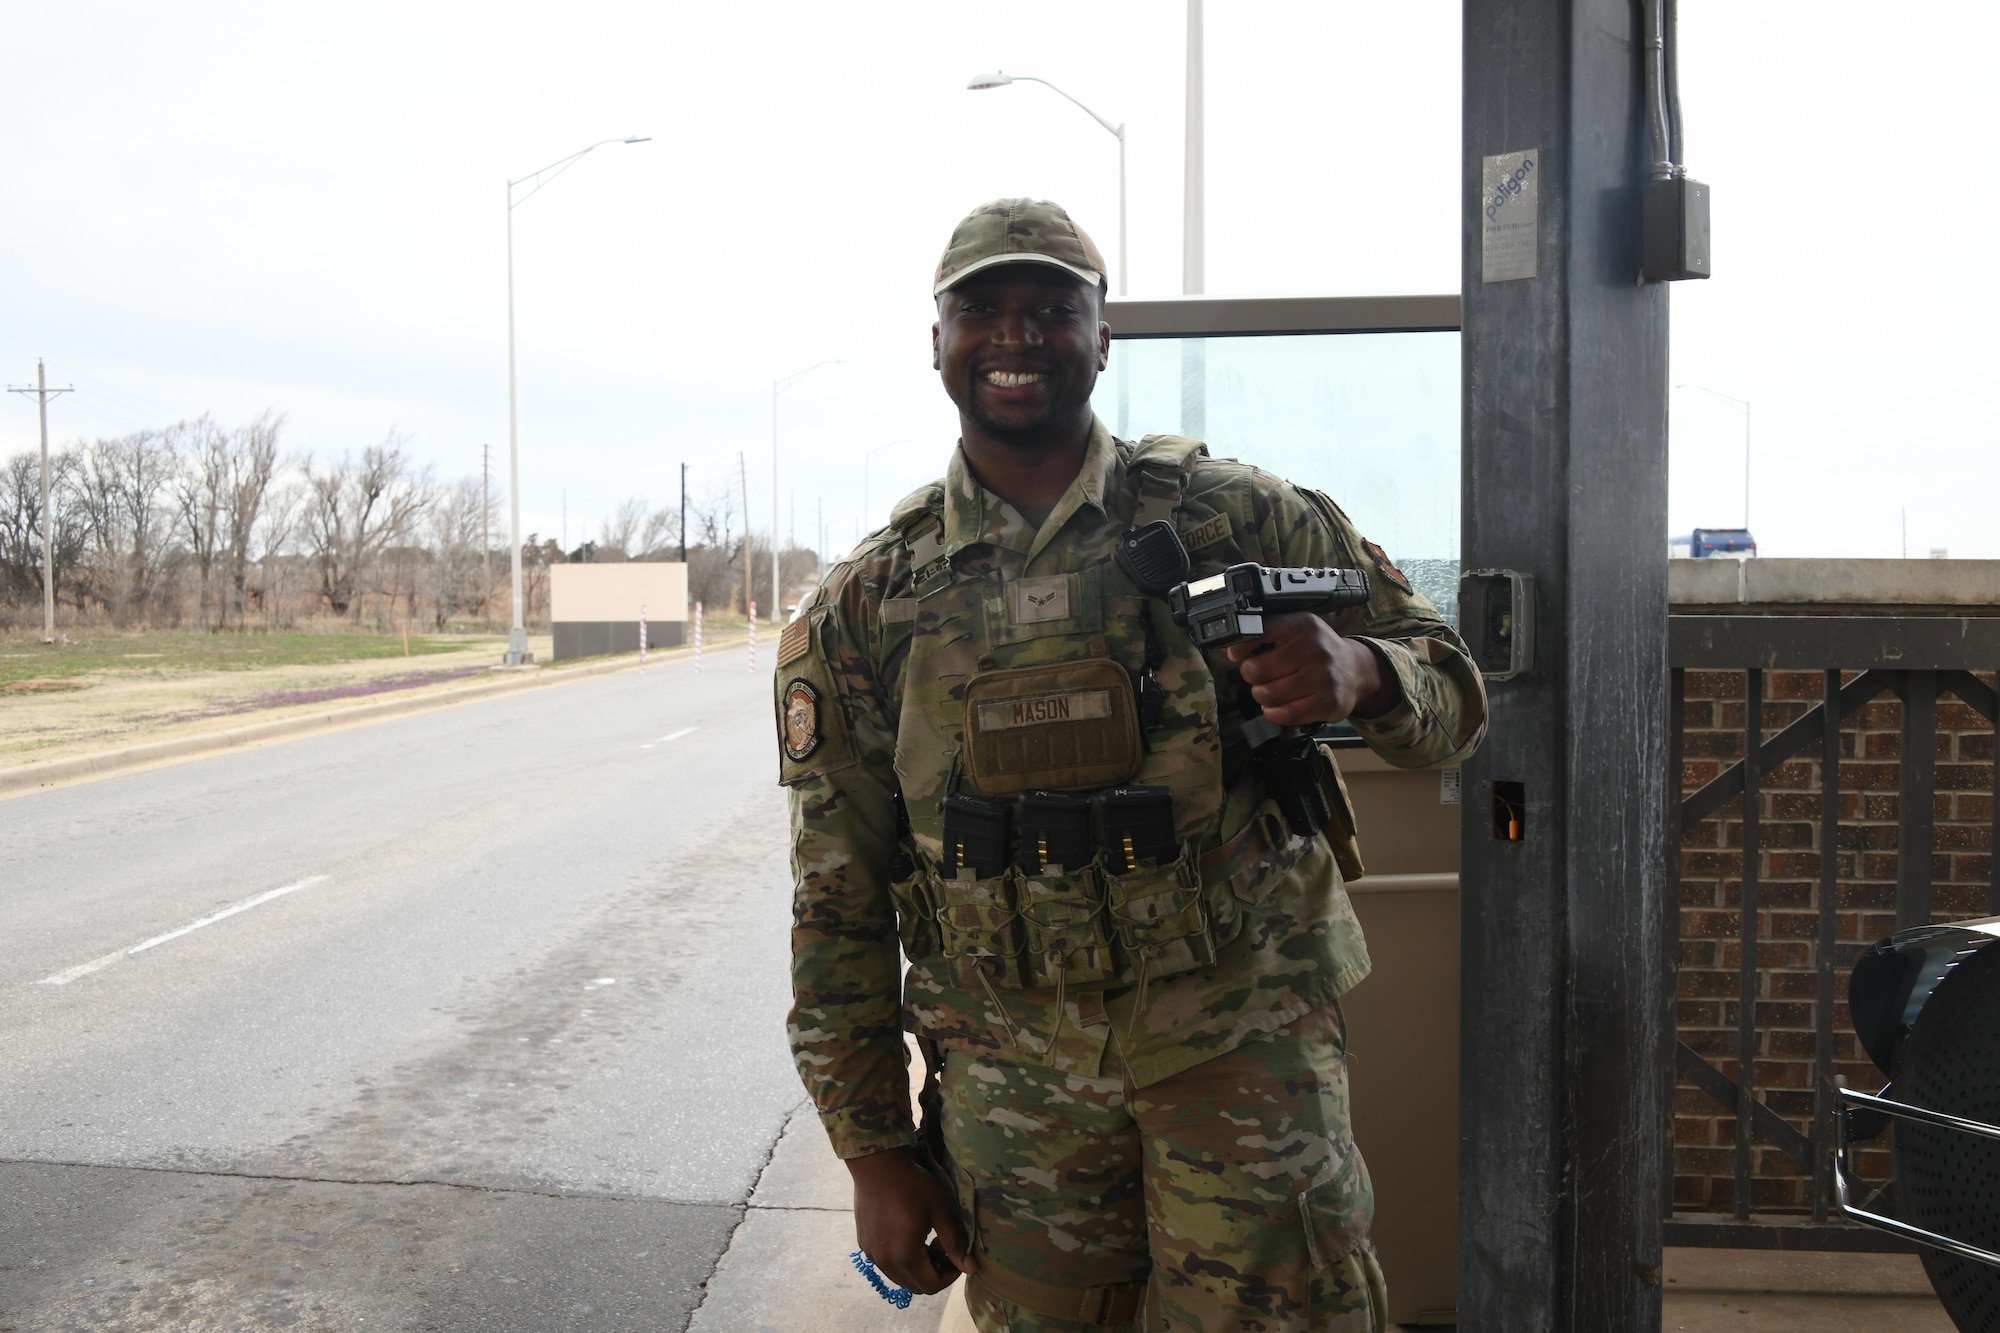 U.S. Air Force Airman 1st Class Michael Mason, 97th Security Forces Squadron patrolman, poses for a photo at Altus Air Force Base, Oklahoma, Feb. 21, 2023. As a patrolman, part of Mason’s duty is to be the base’s first line of defense against security threats.. (U.S. Air Force photo by Airman 1st Class Miyah Gray)